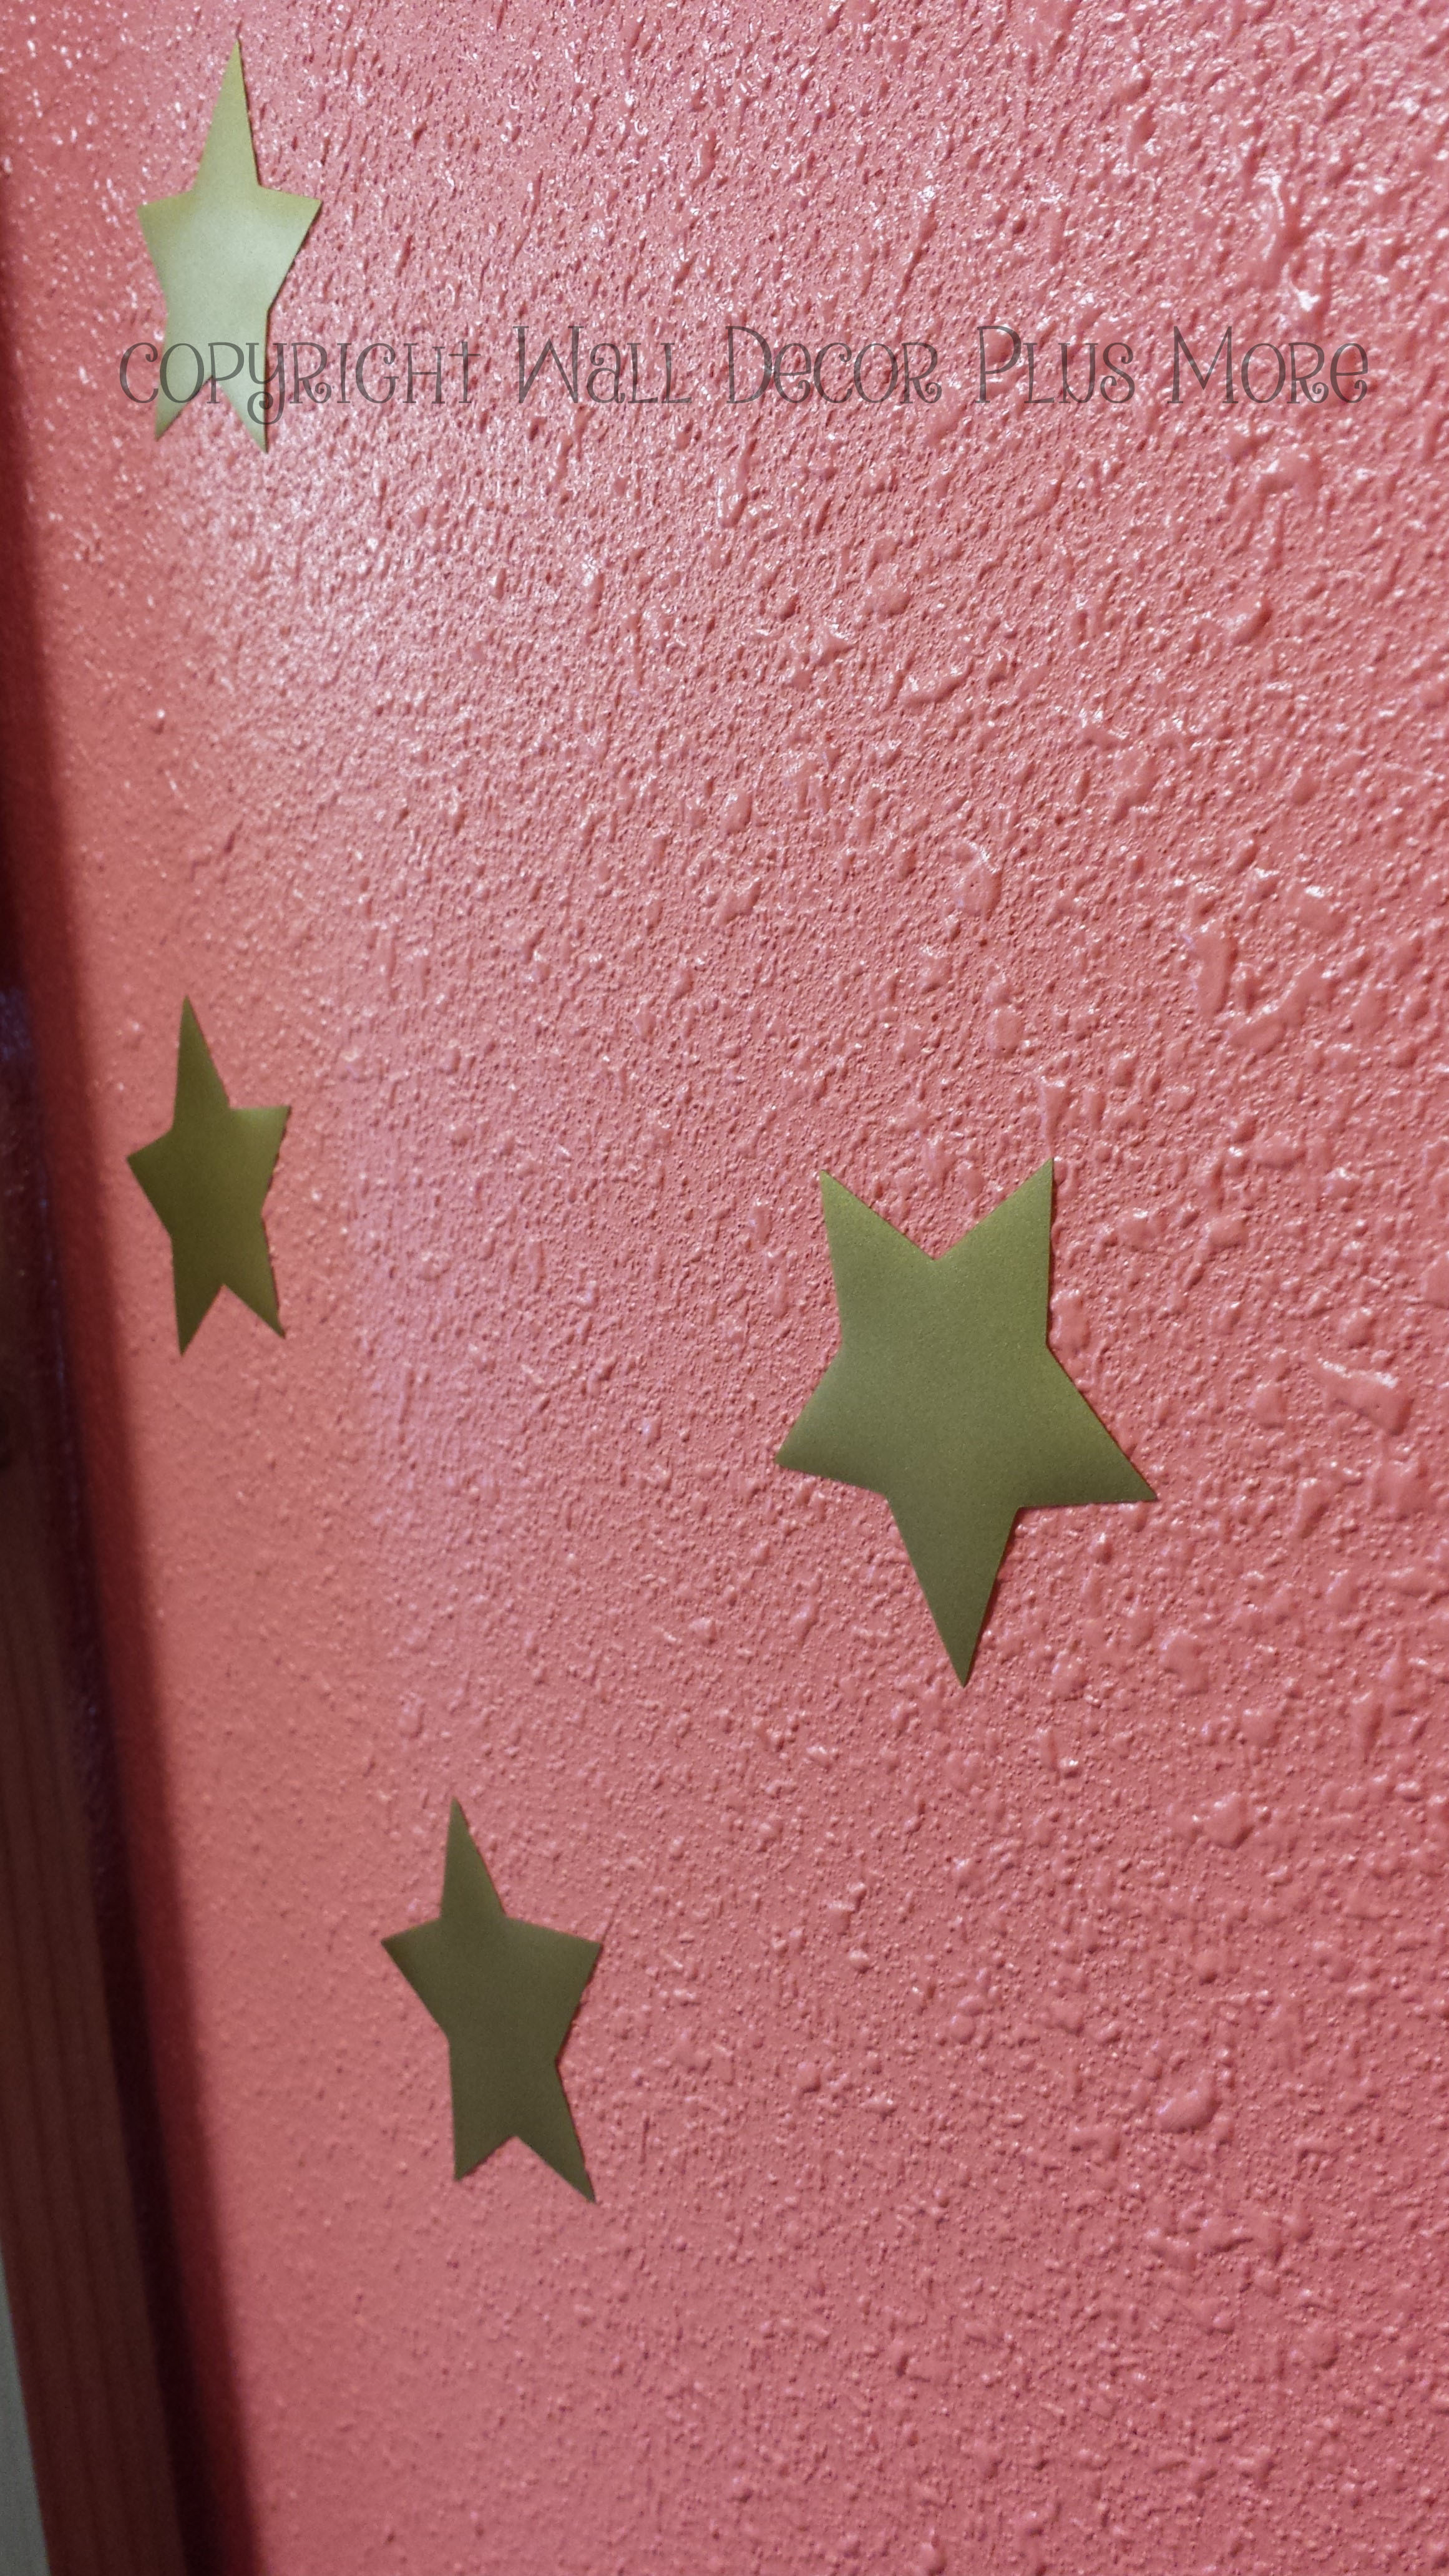 Gold Star Wall Decal Vinyl Stickers on Office Wall